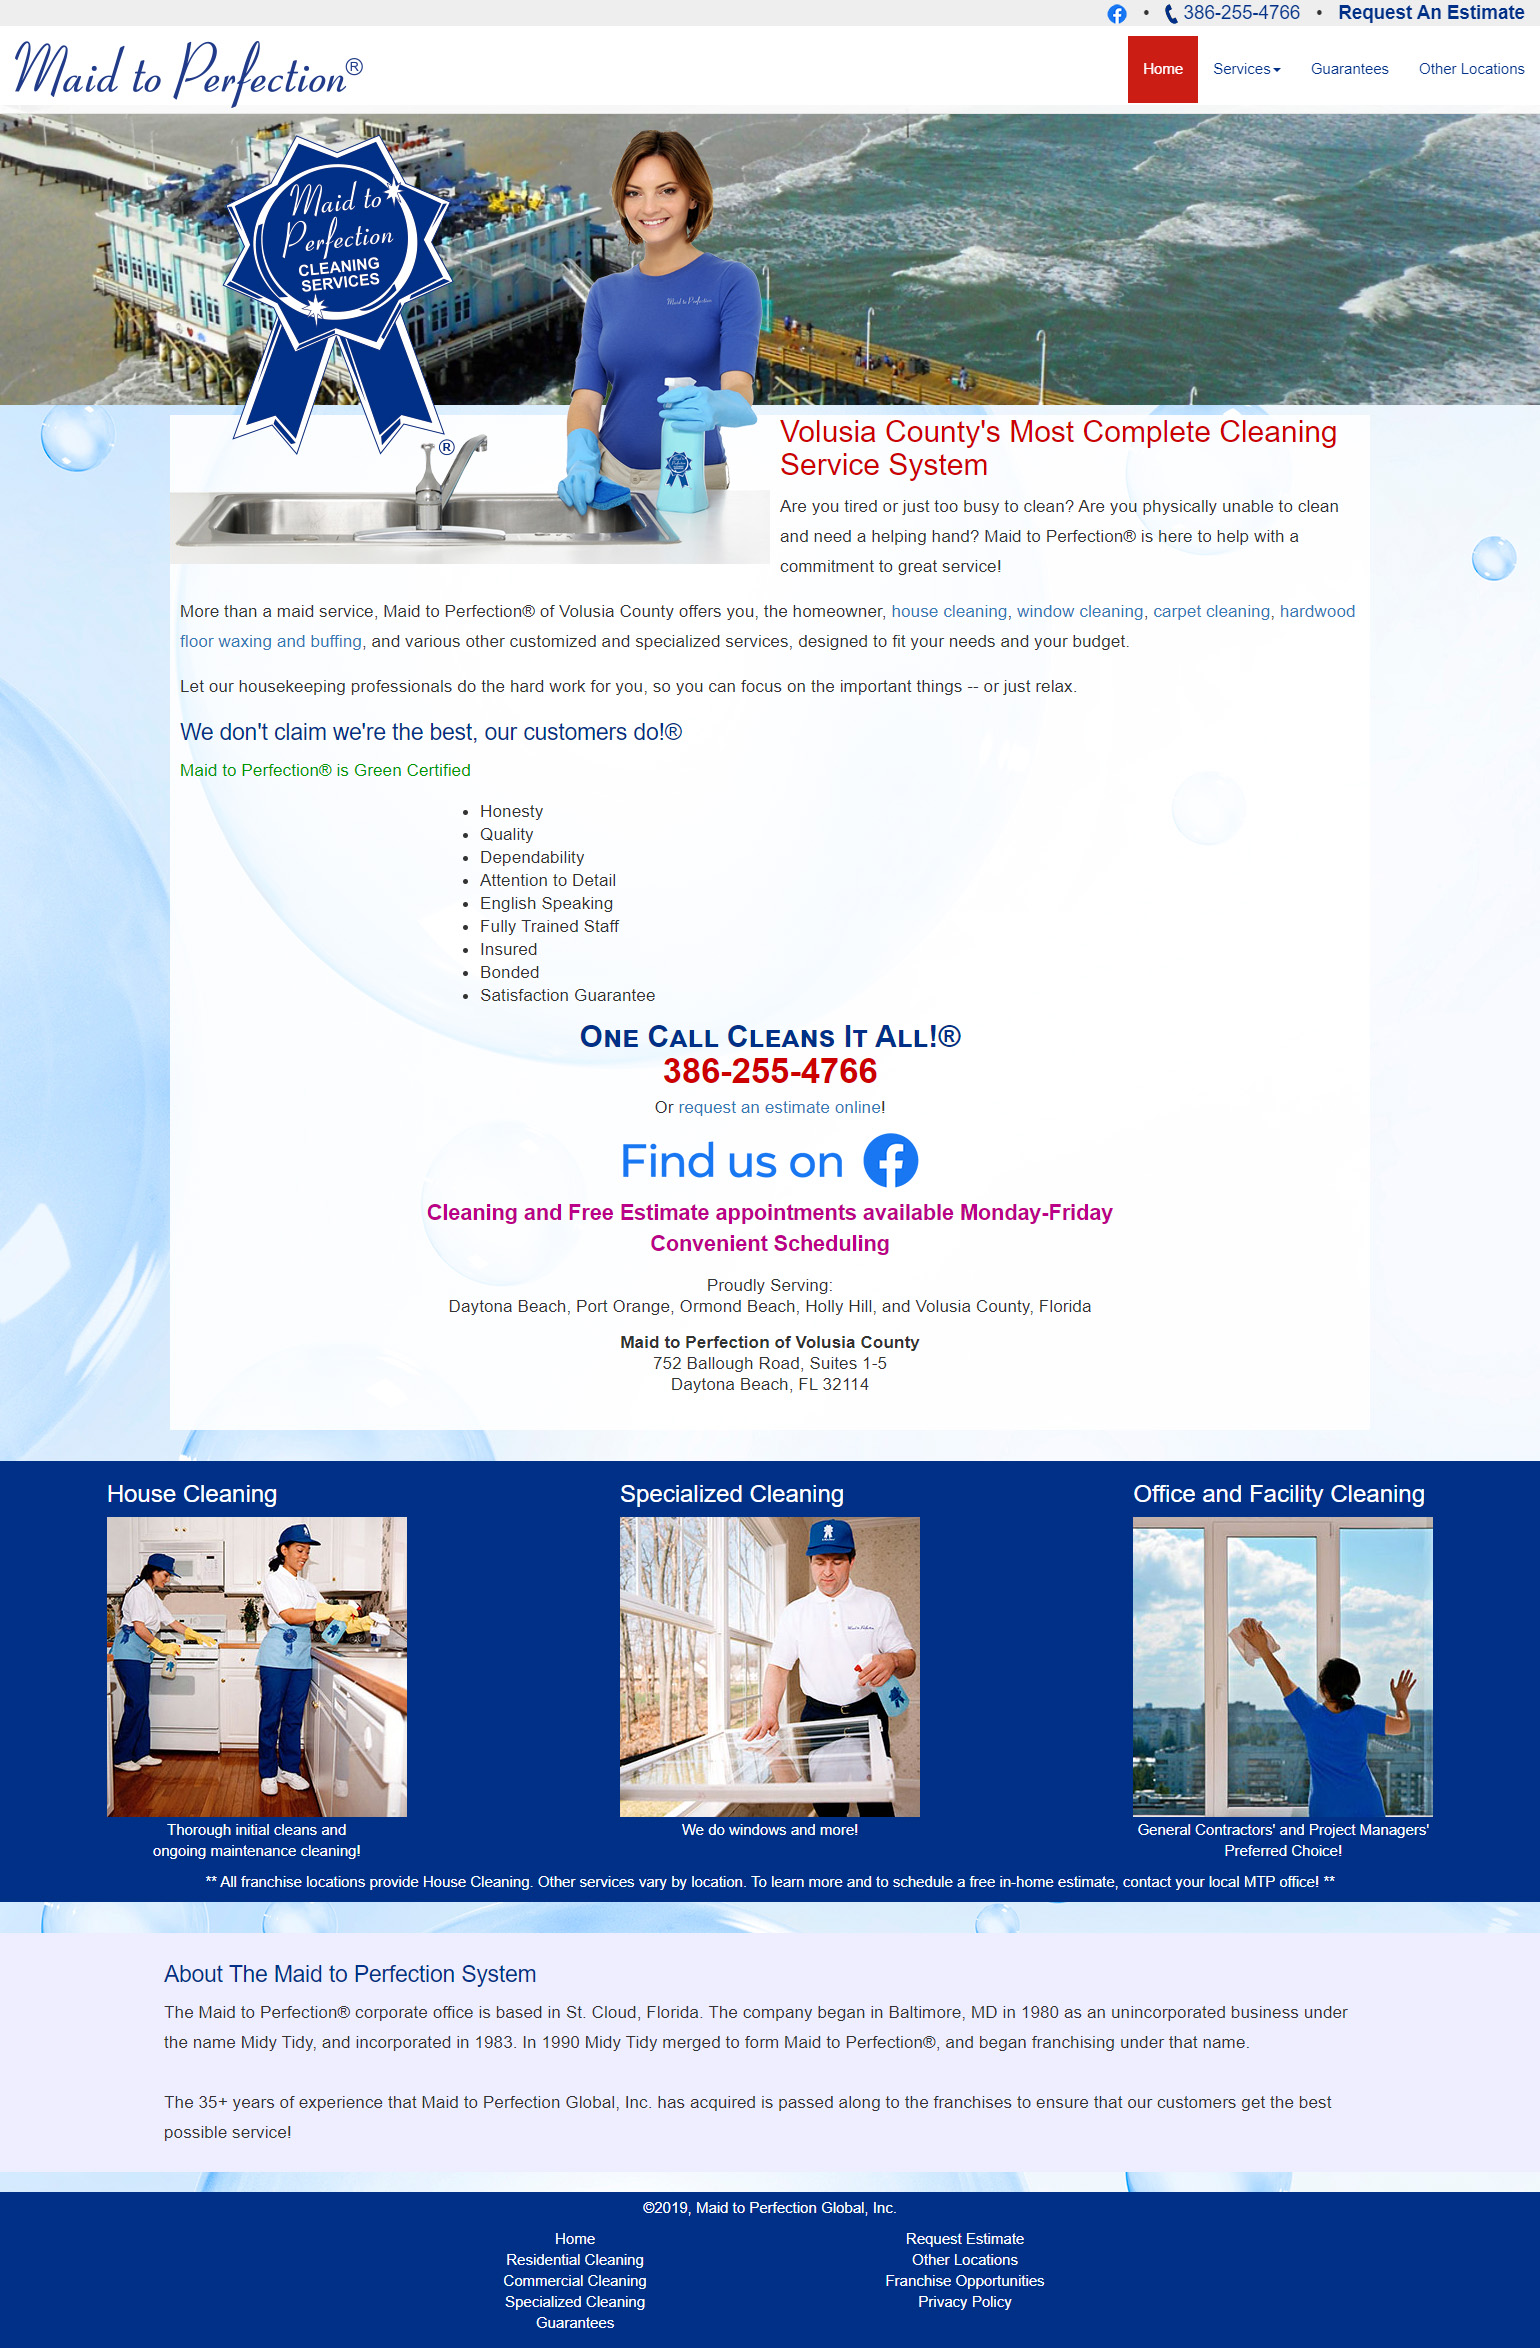 Maid to Perfection franchise website